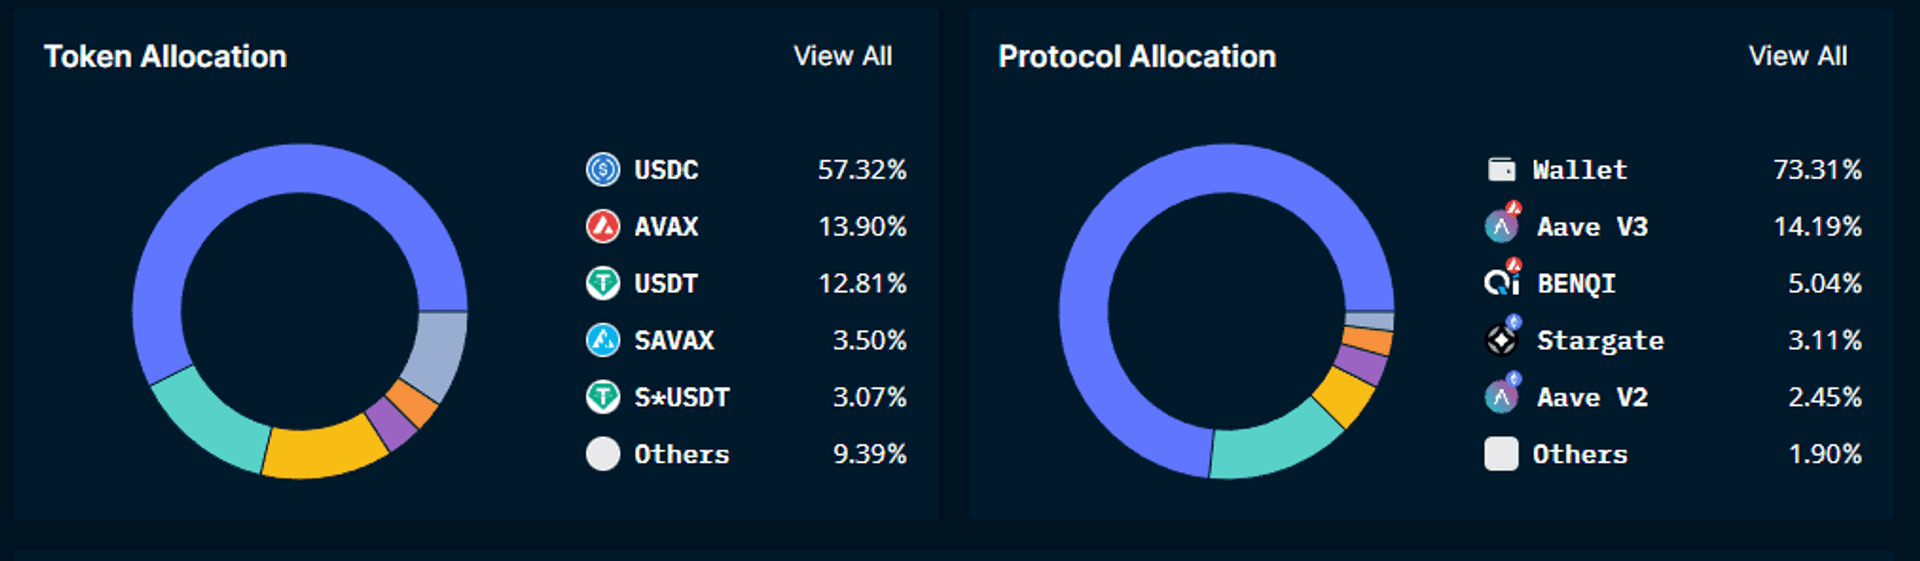 Token and protocol allocation of large FTX withdrawers via Avalanche network